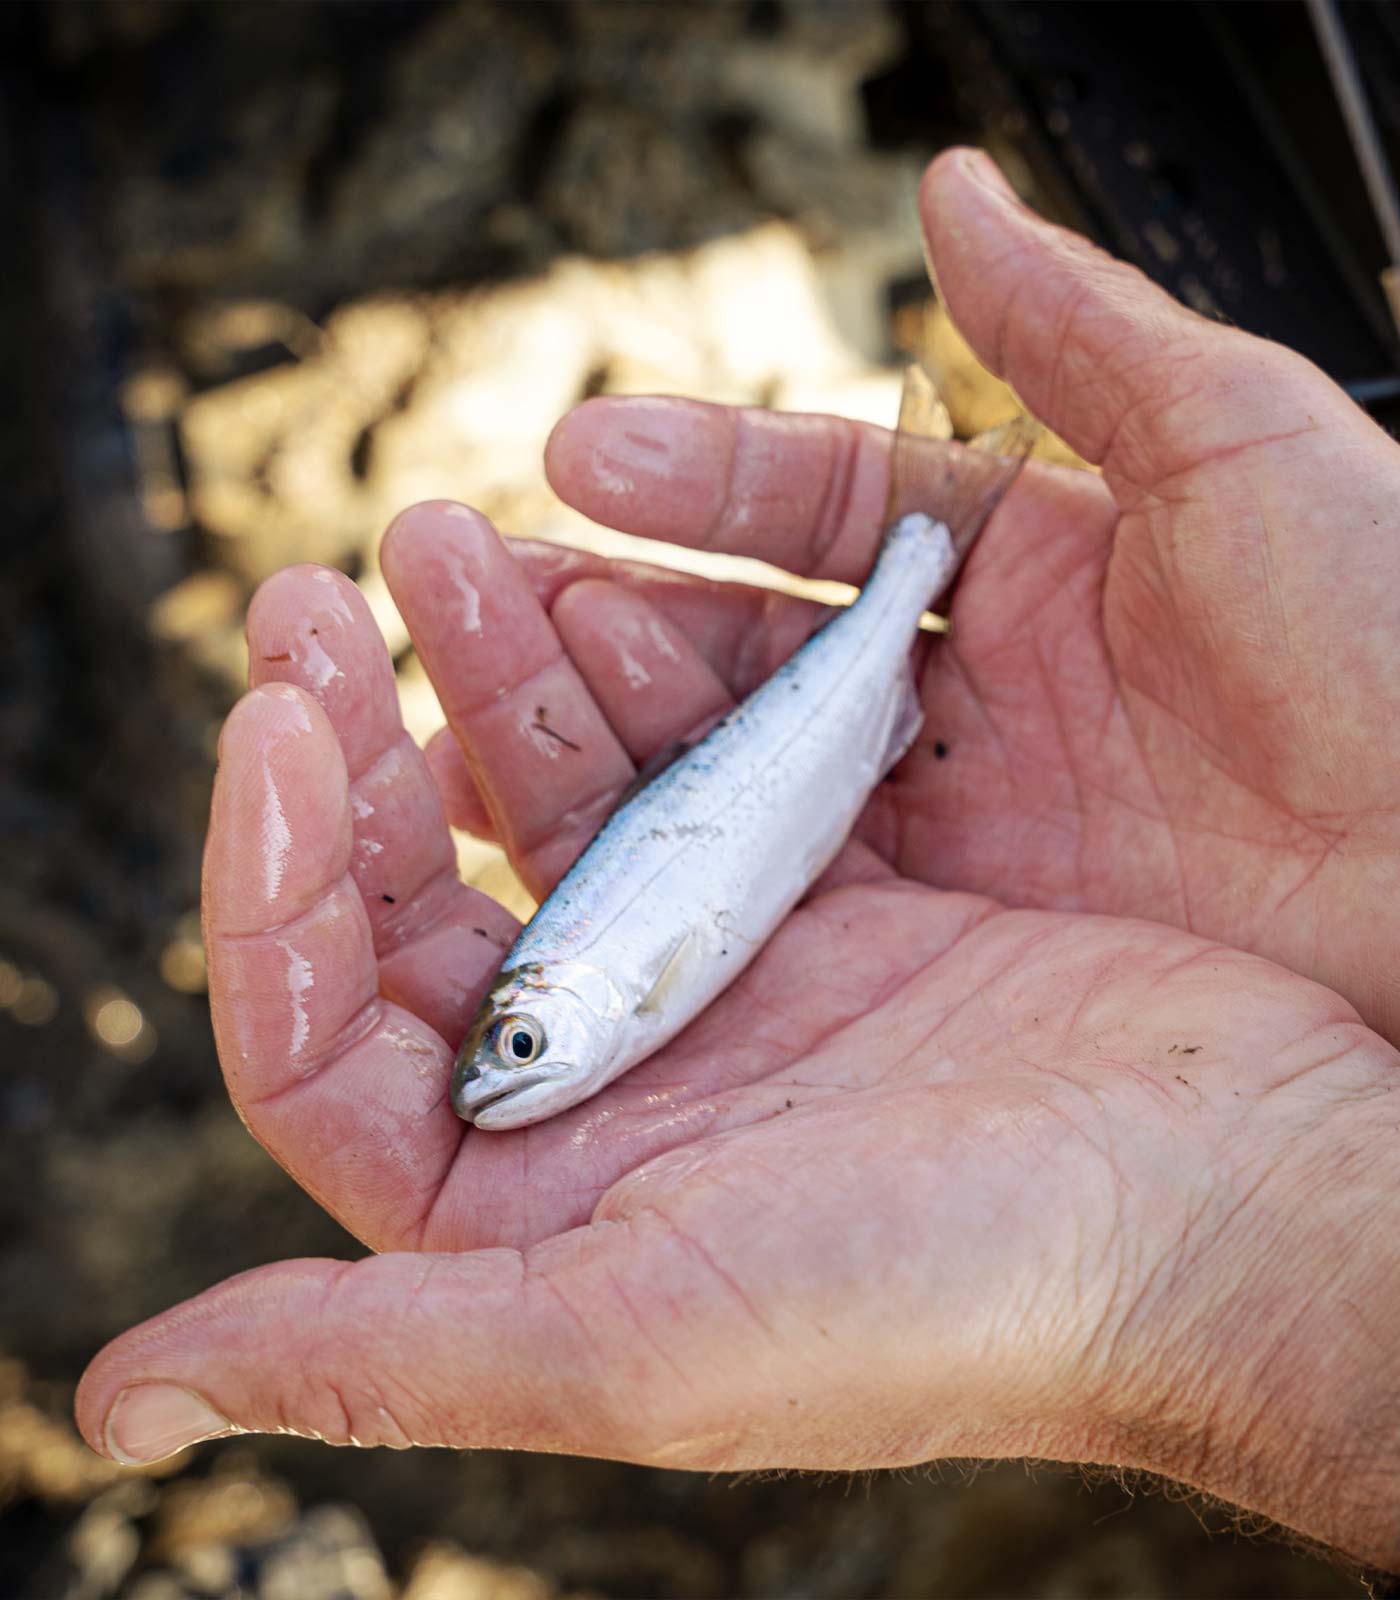 close-up of a wet hand with small fish caught